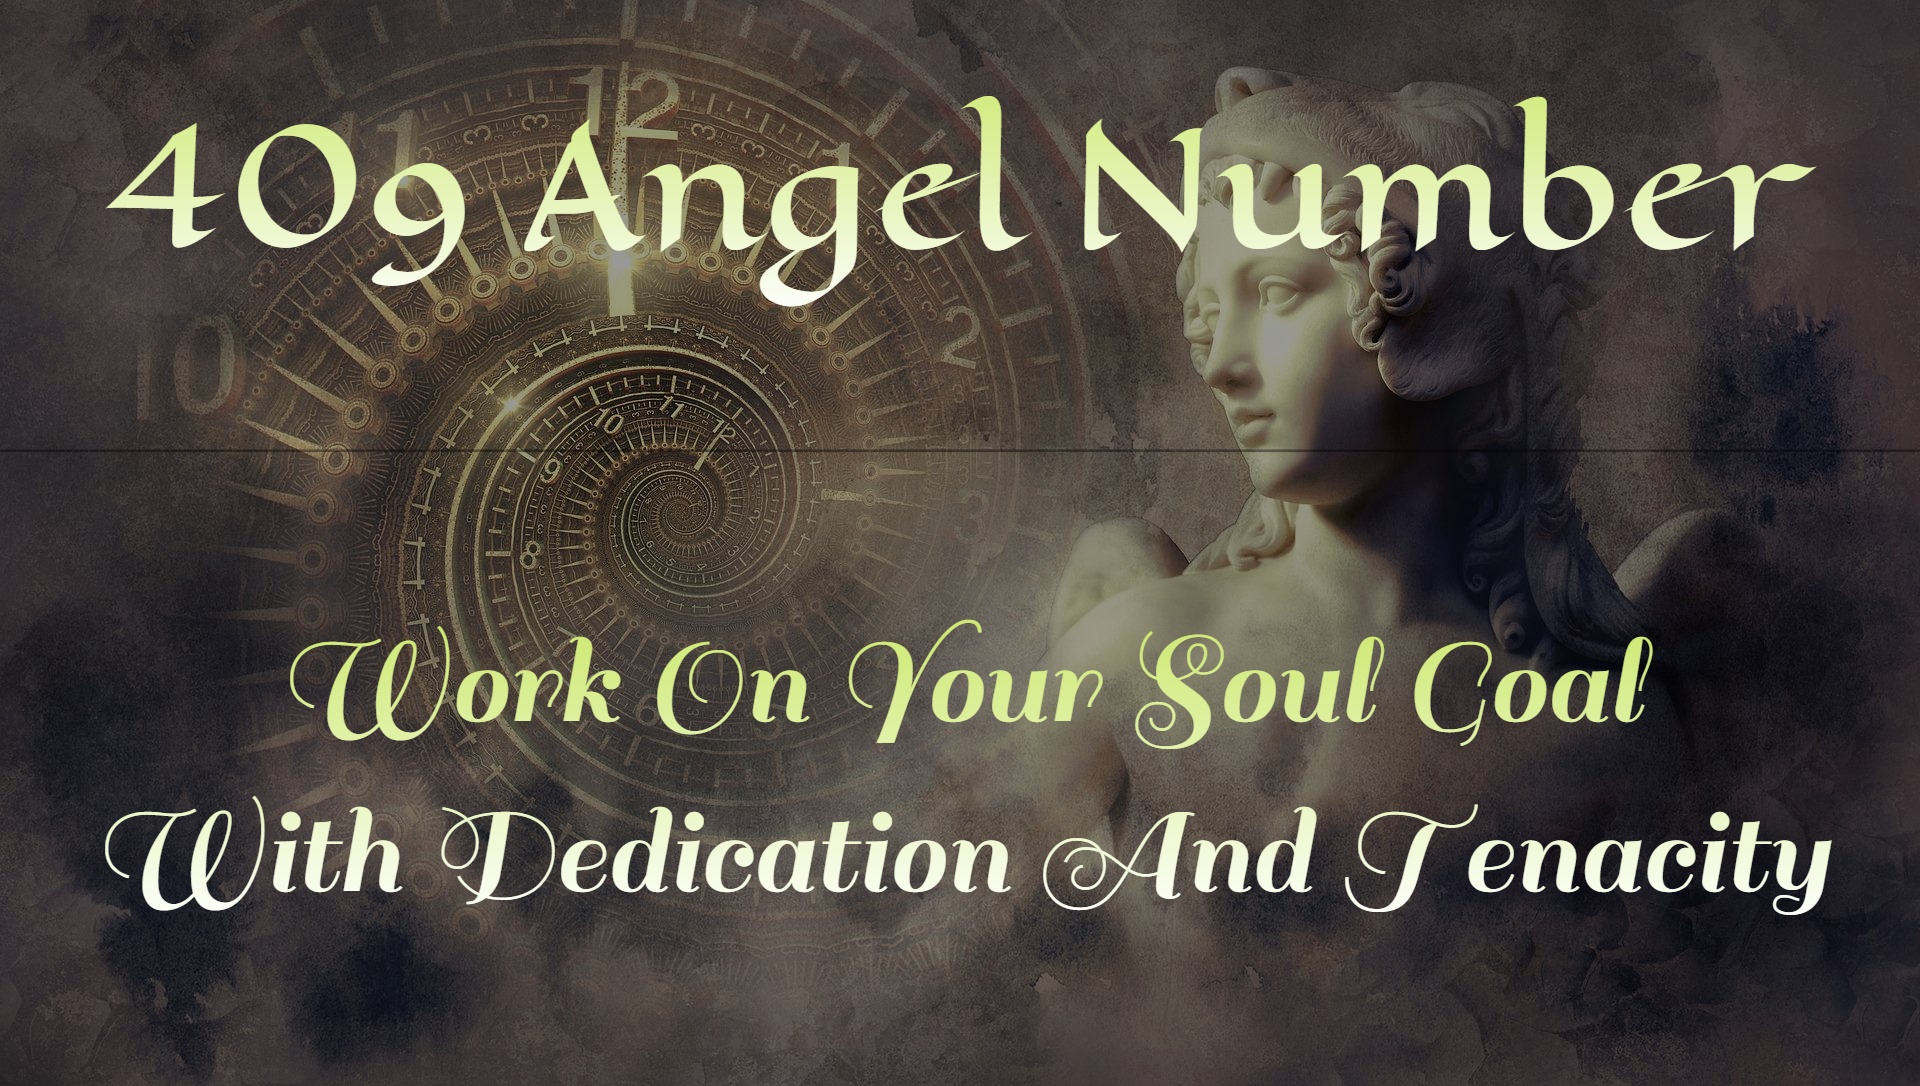 409 Angel Number - Work On Your Soul Goal With Dedication And Tenacity